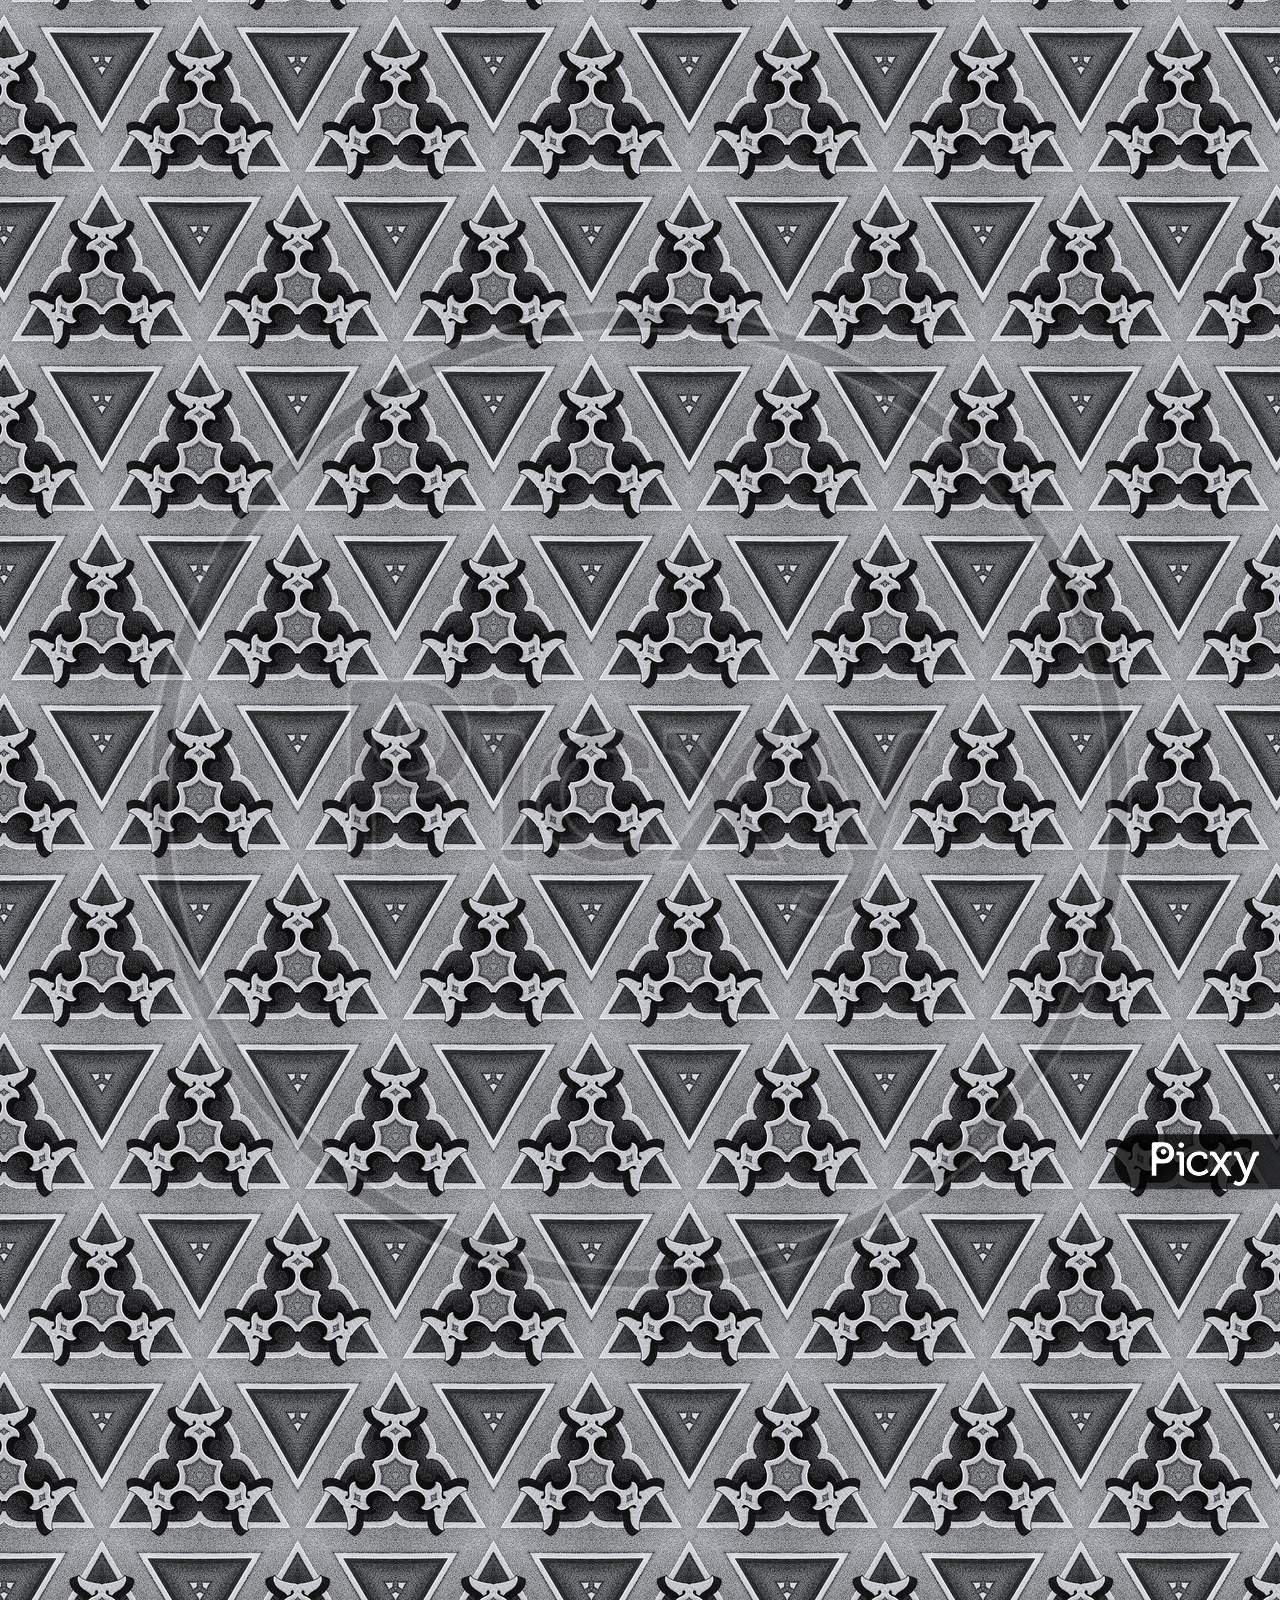 Elegant And Ornamental Dark Grey Symmetrical Designs On Solid Sheet Of Wallpaper. Concept Of Home Decor And Interior Designing